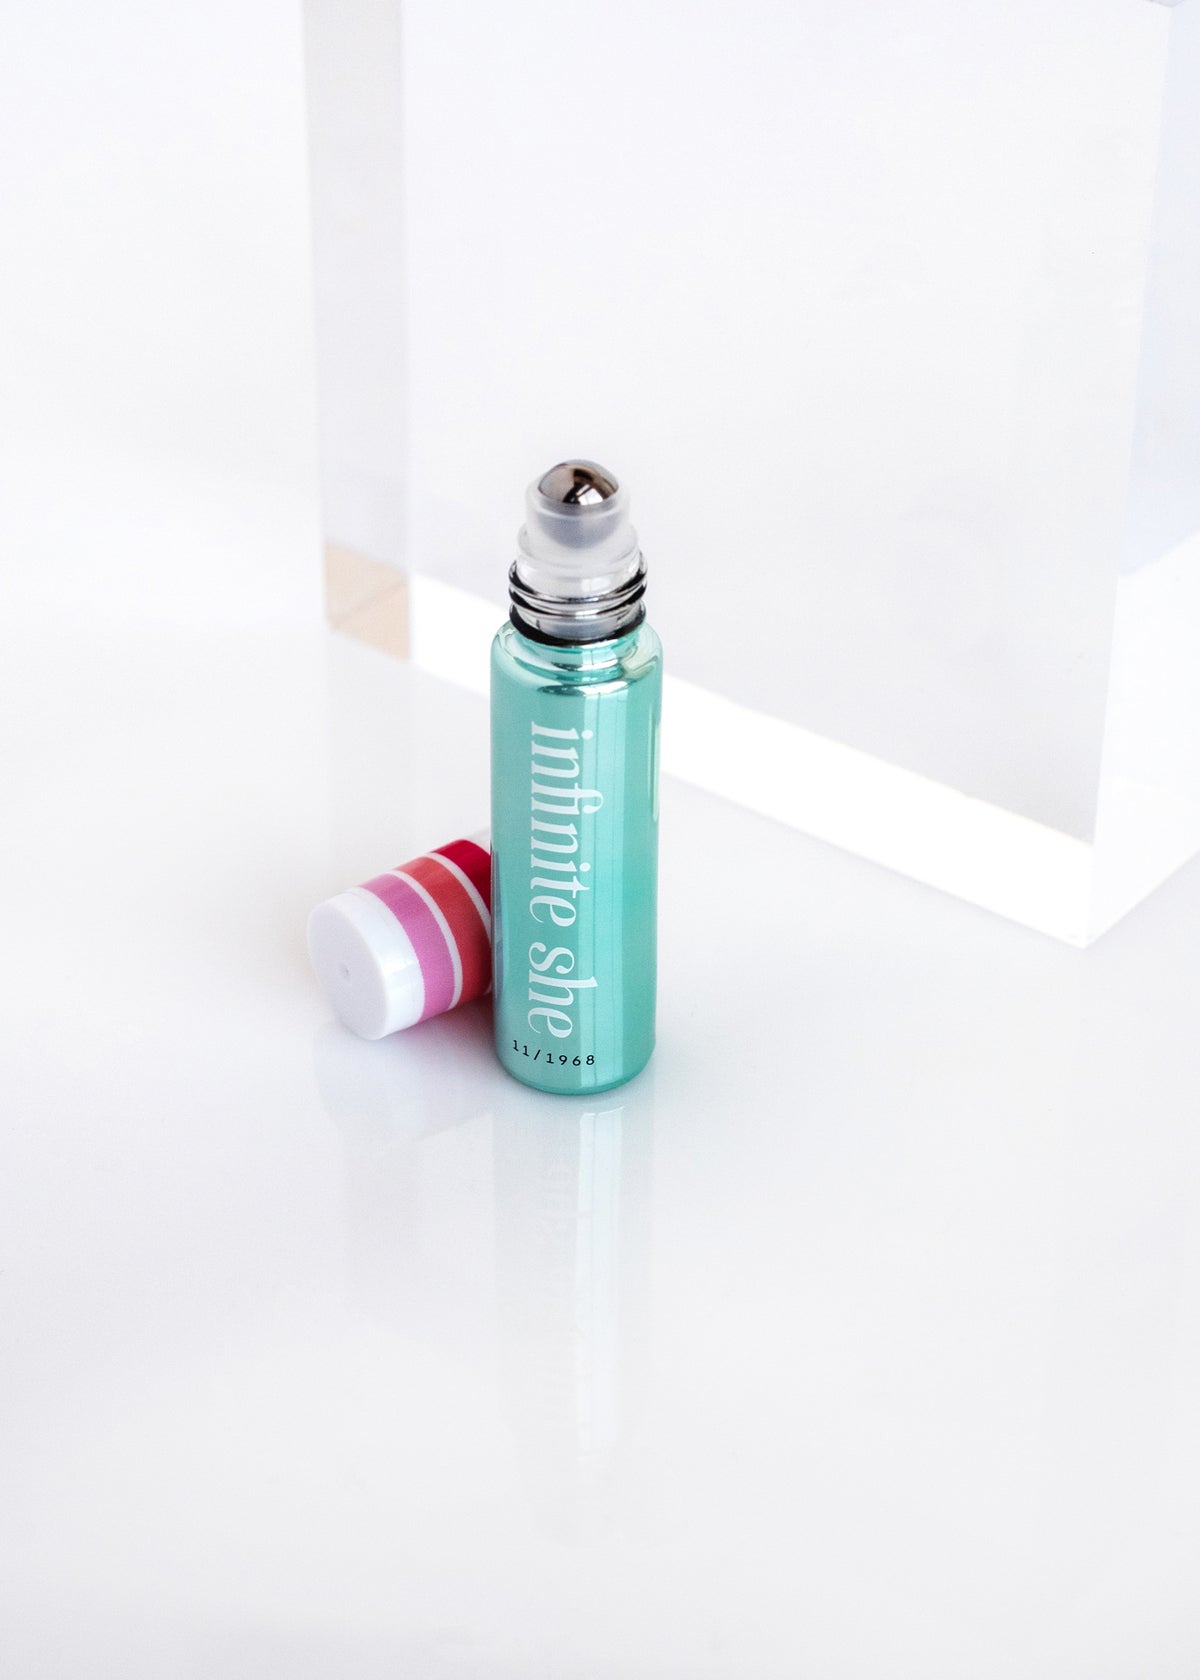 A teal rollerball perfume bottle labeled "Infinite She Fearless Rollerball Eau de Parfum" by Margot Elena, next to its pink cap, displayed against a clean white background with a subtle shadow.